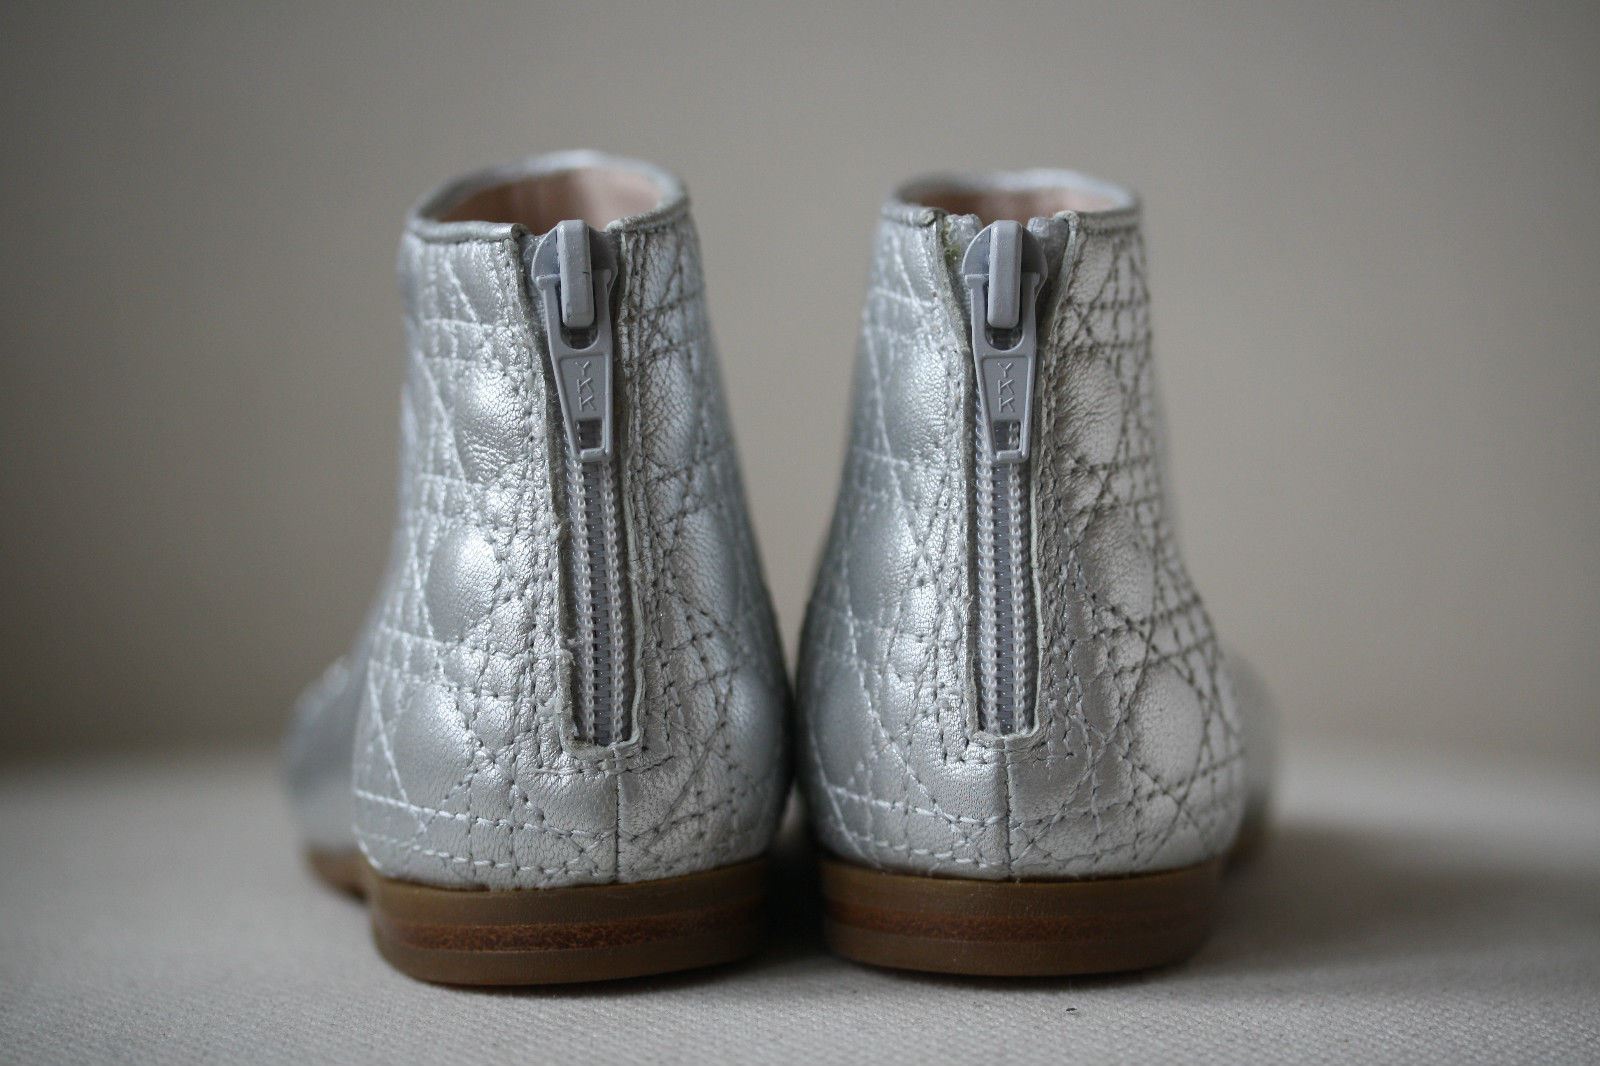 BABY DIOR SILVER LEATHER GLITTER CANNAGE ANKLE BOOTS EU 20 UK 4